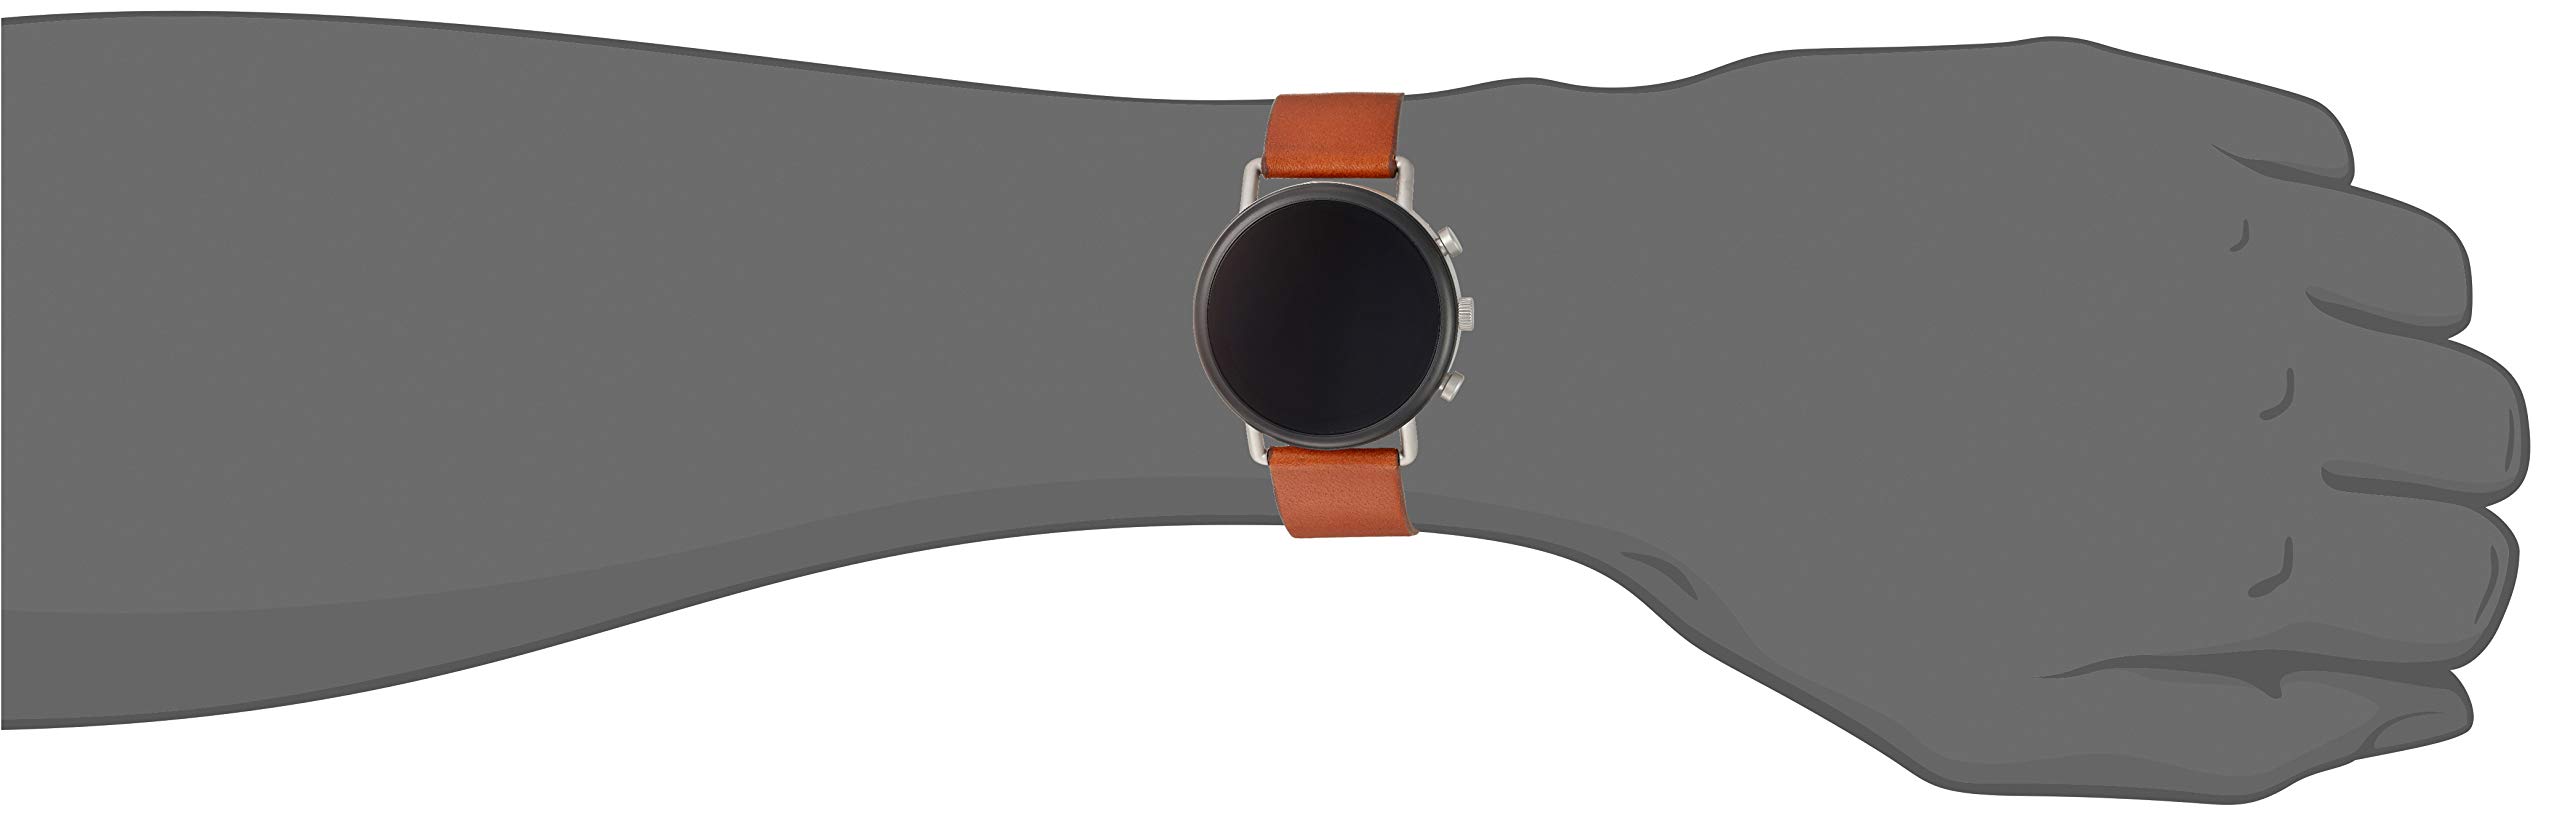 Skagen Connected Falster 2 Stainless Steel and Leather Touchscreen Smartwatch, Color: Silver, Brown (Model: SKT5104)